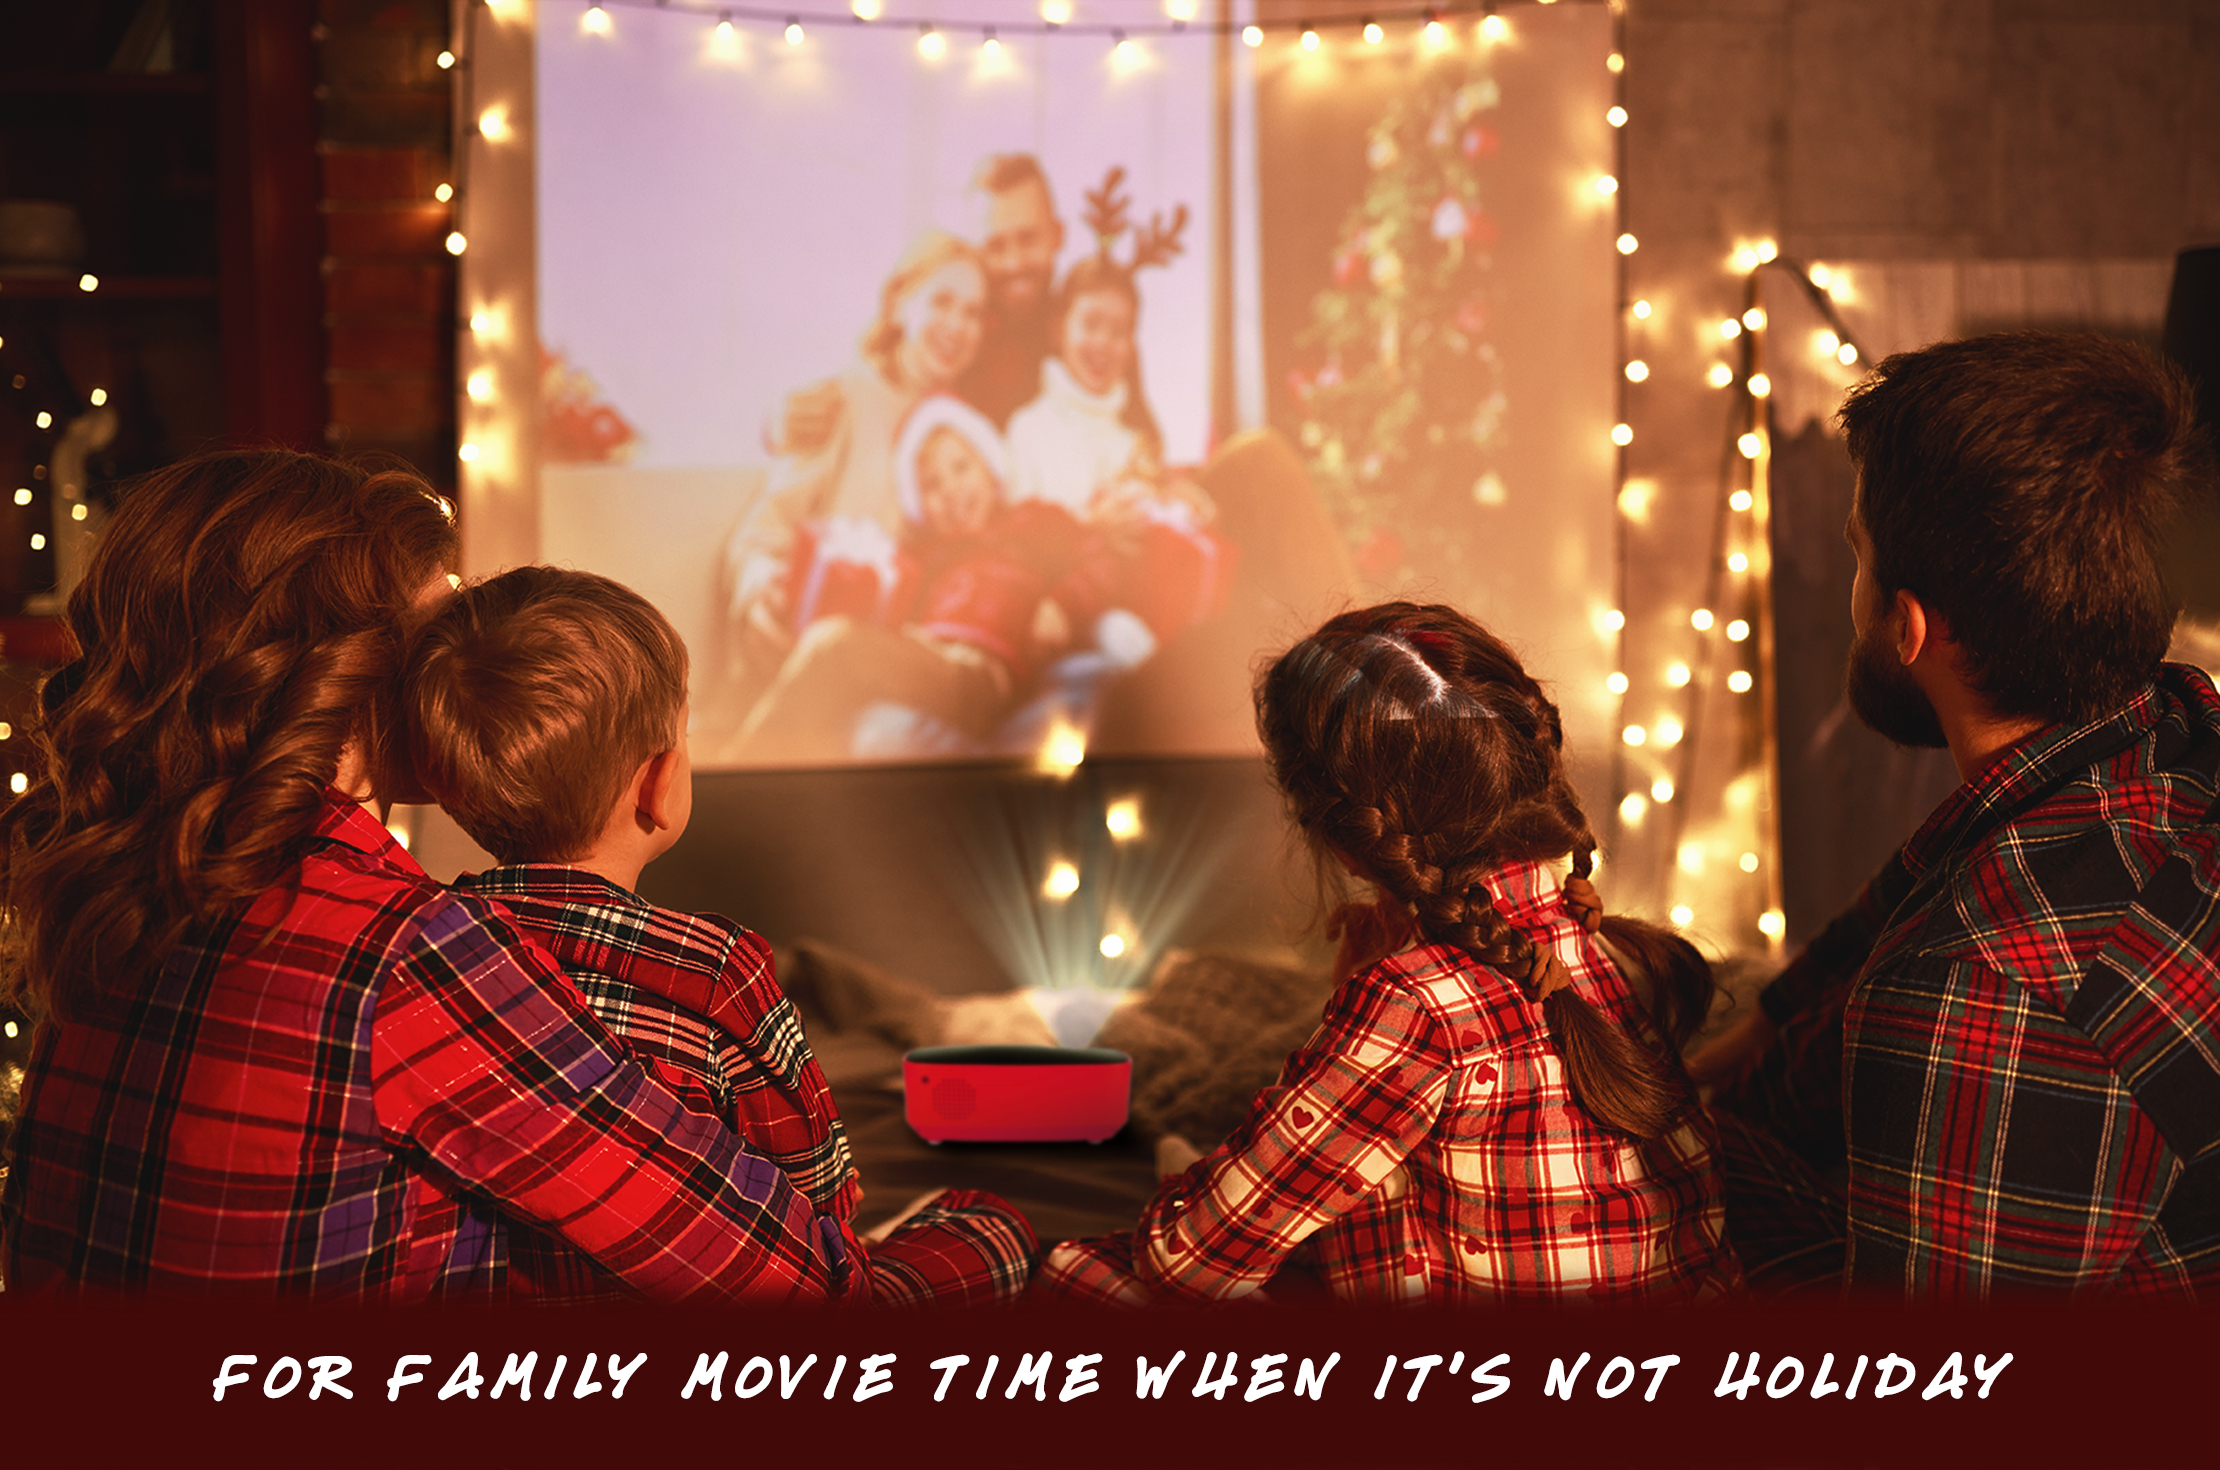 Full featured projector to use outside of Holidays as well as during.